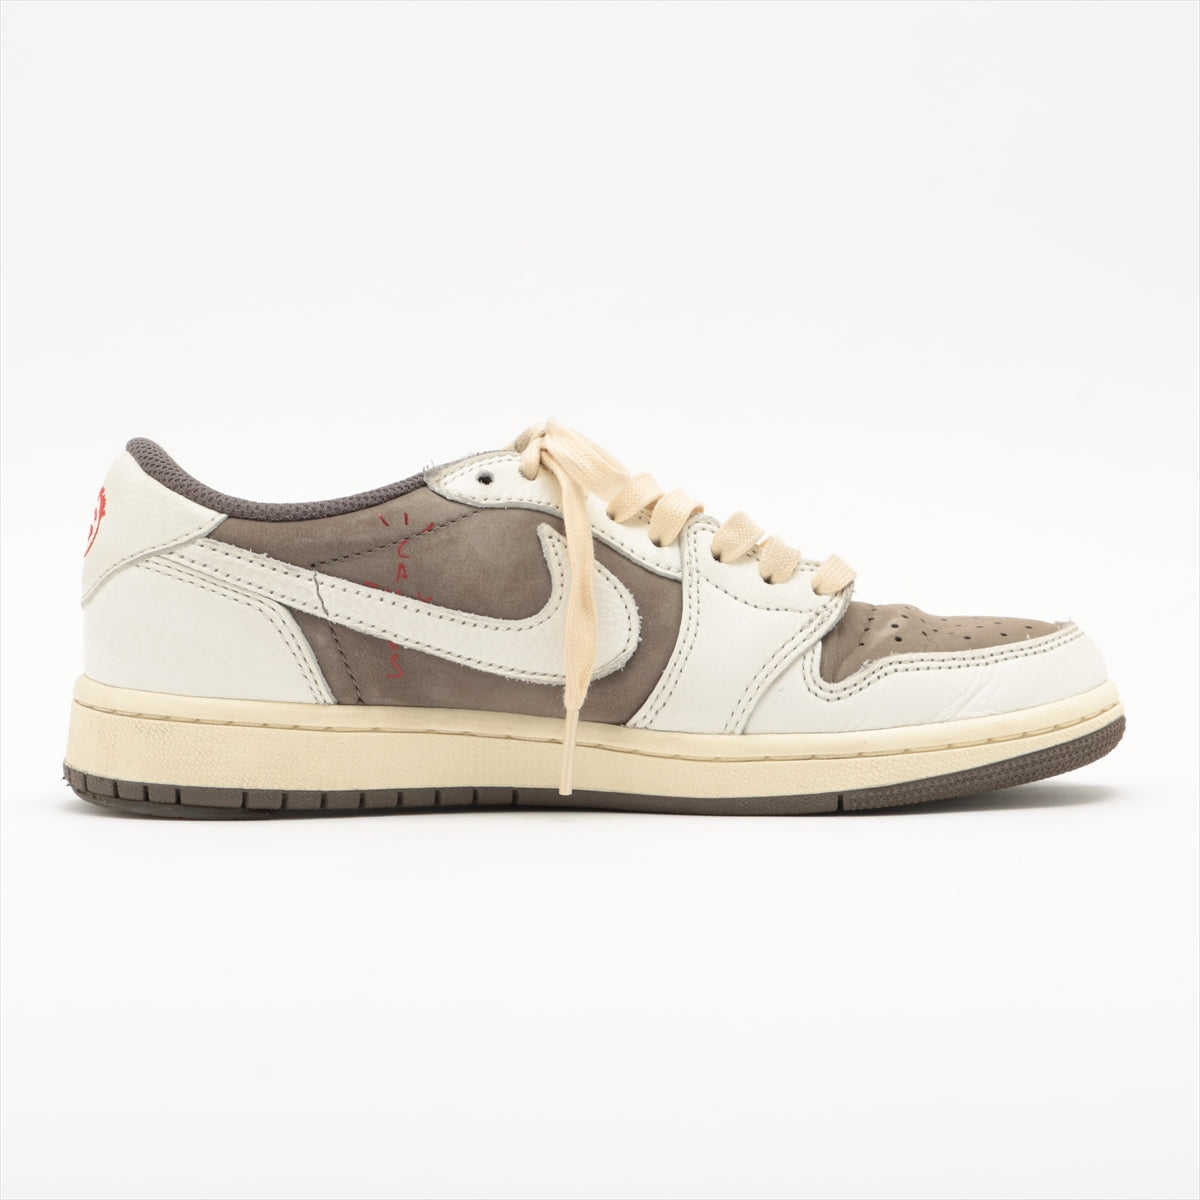 Nike x Travis Scott AIR JORDAN 1 Leather Sneakers 24cm Unisex Gray x white DM7866-162 Is there a replacement string Heel repair available